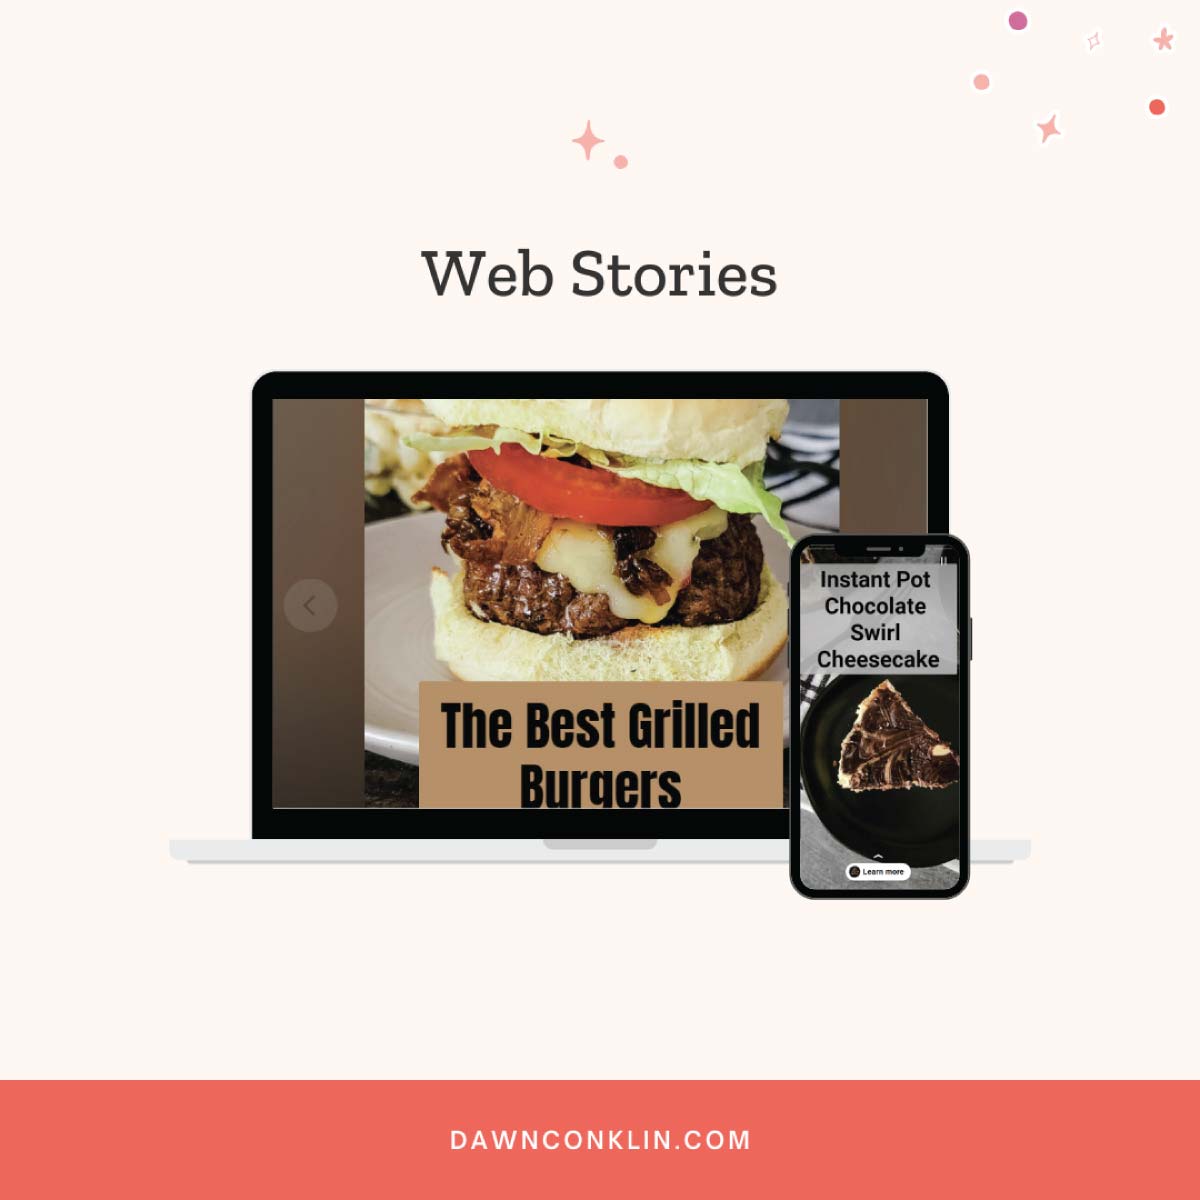 2 web stories shown - 1 on a phone for an Instant Pot chocolate swirl cheesecake and 1 on a computer screen for the best grilled burgers.